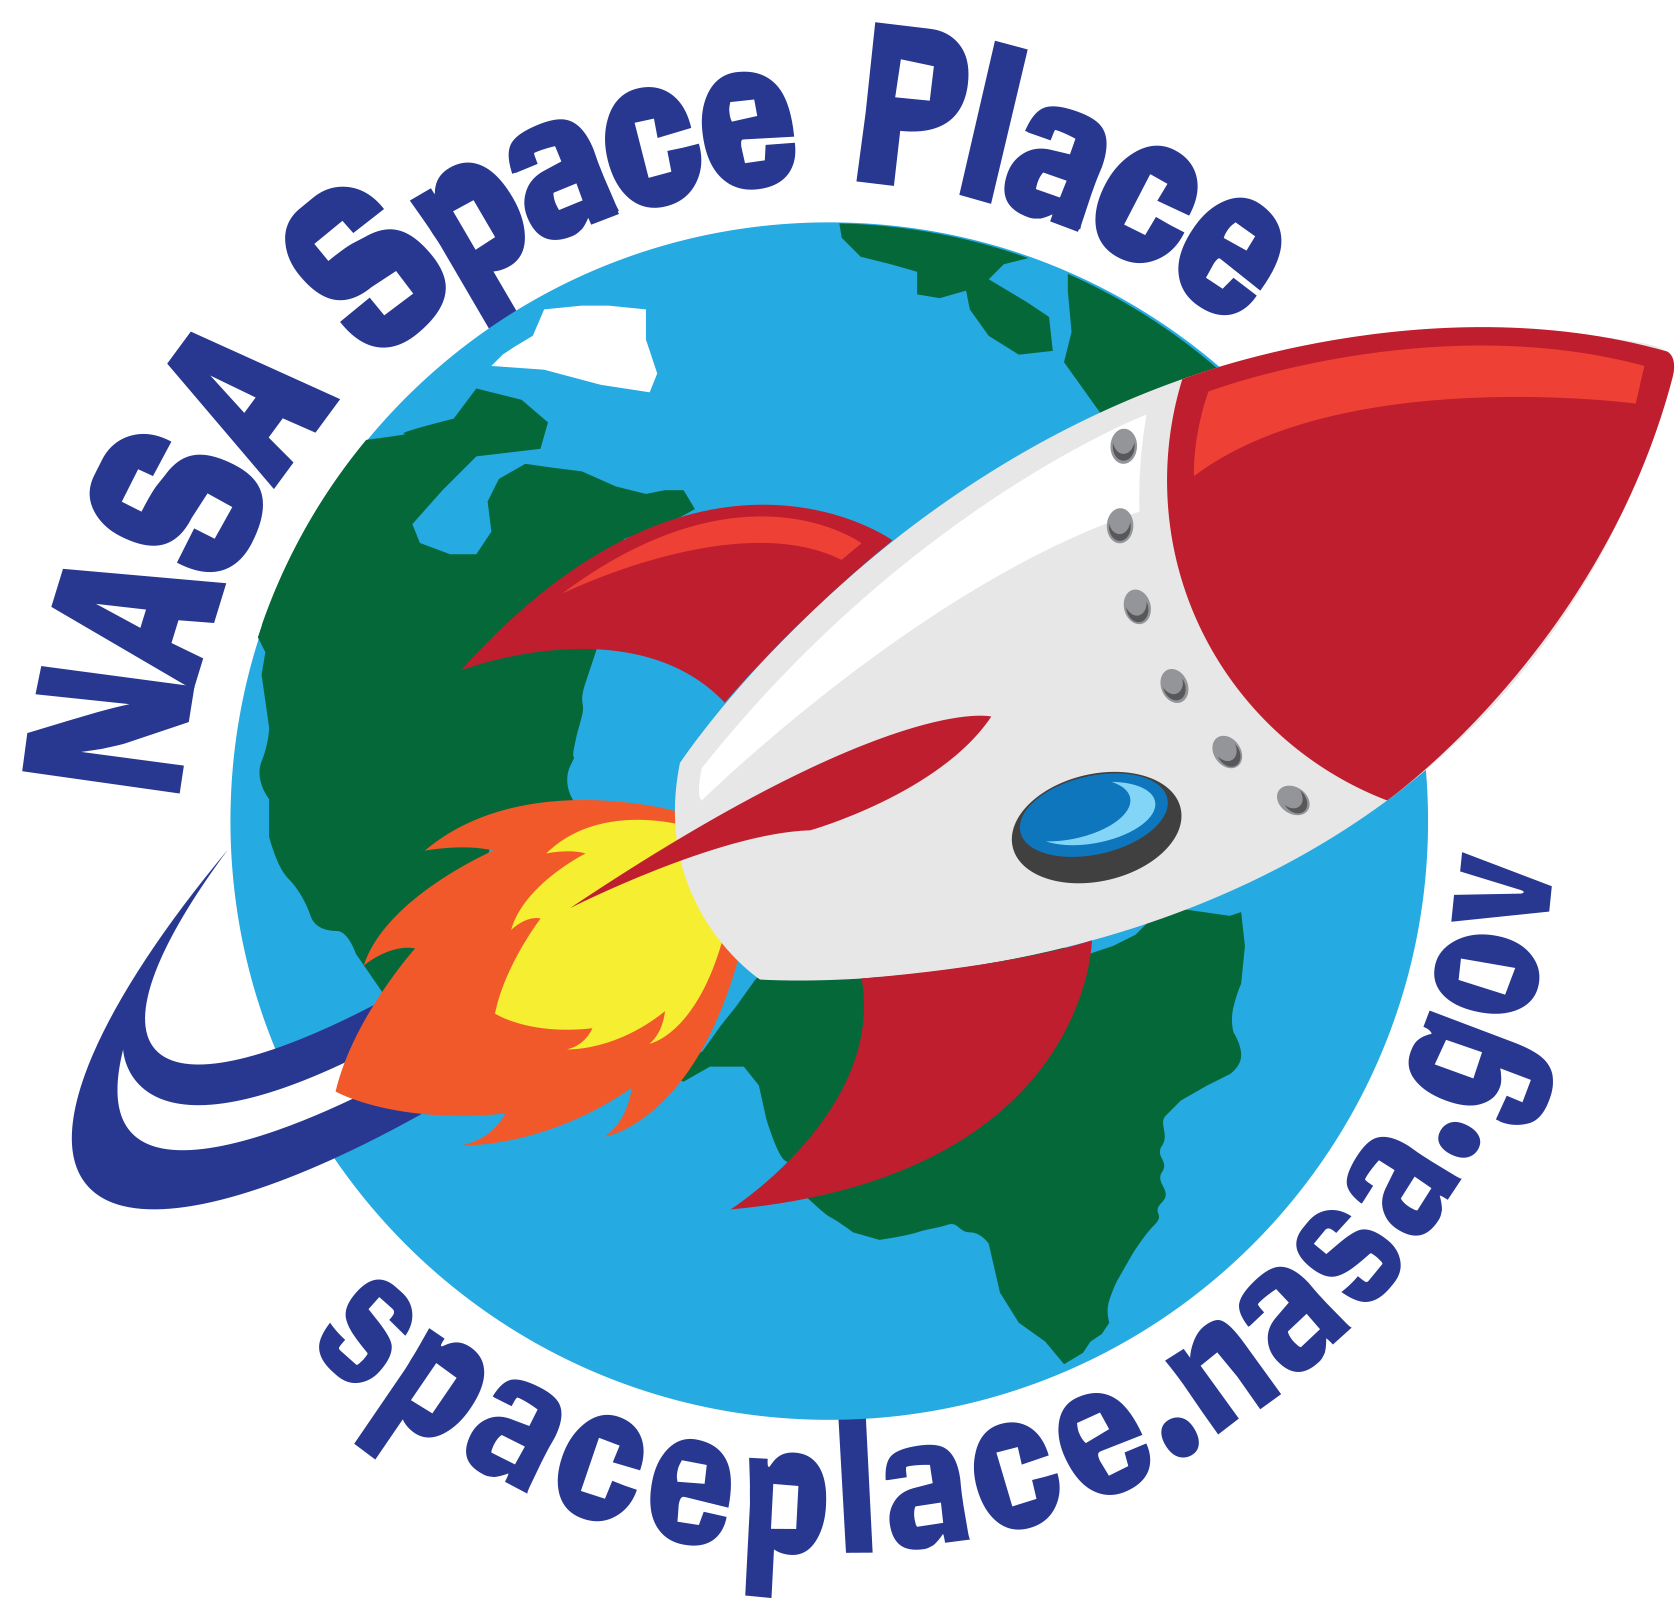 NASA's Space Place - Wikipedia